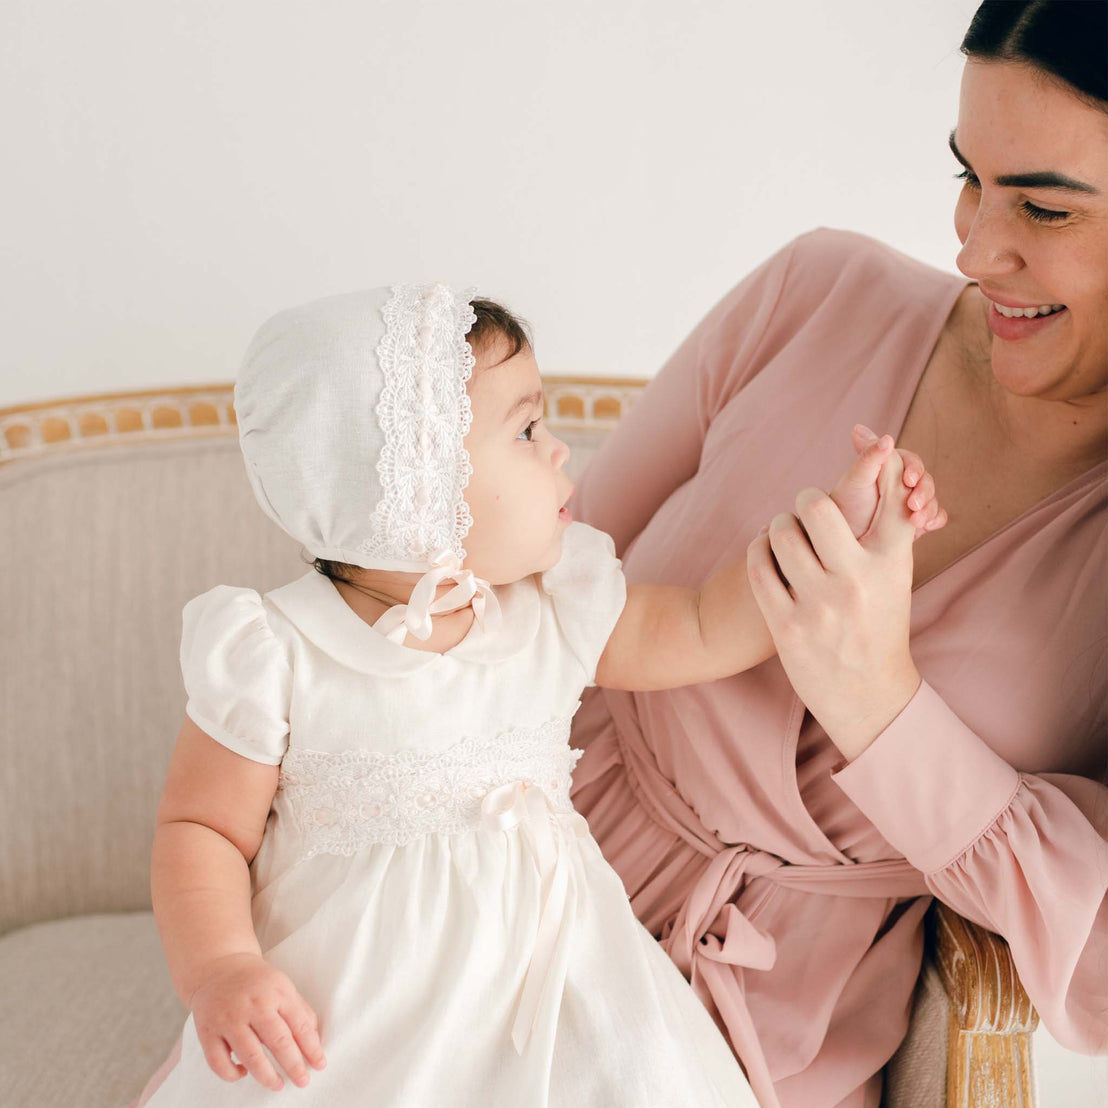 A mother in a pink dress smiles at her baby girl, who is dressed in a boutique white lace christening gown and Emma Bonnet, as they sit together on a beige sofa.